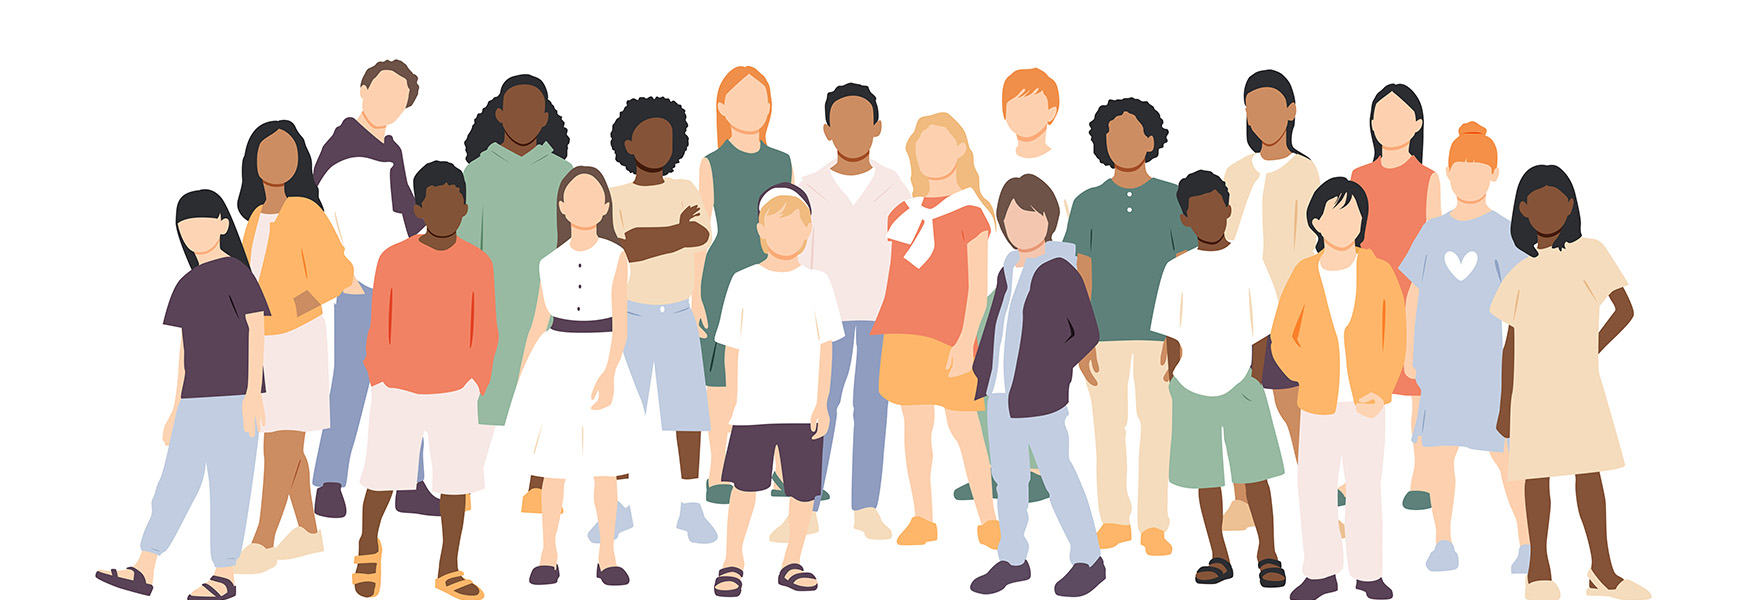 Diverse youth group illustration